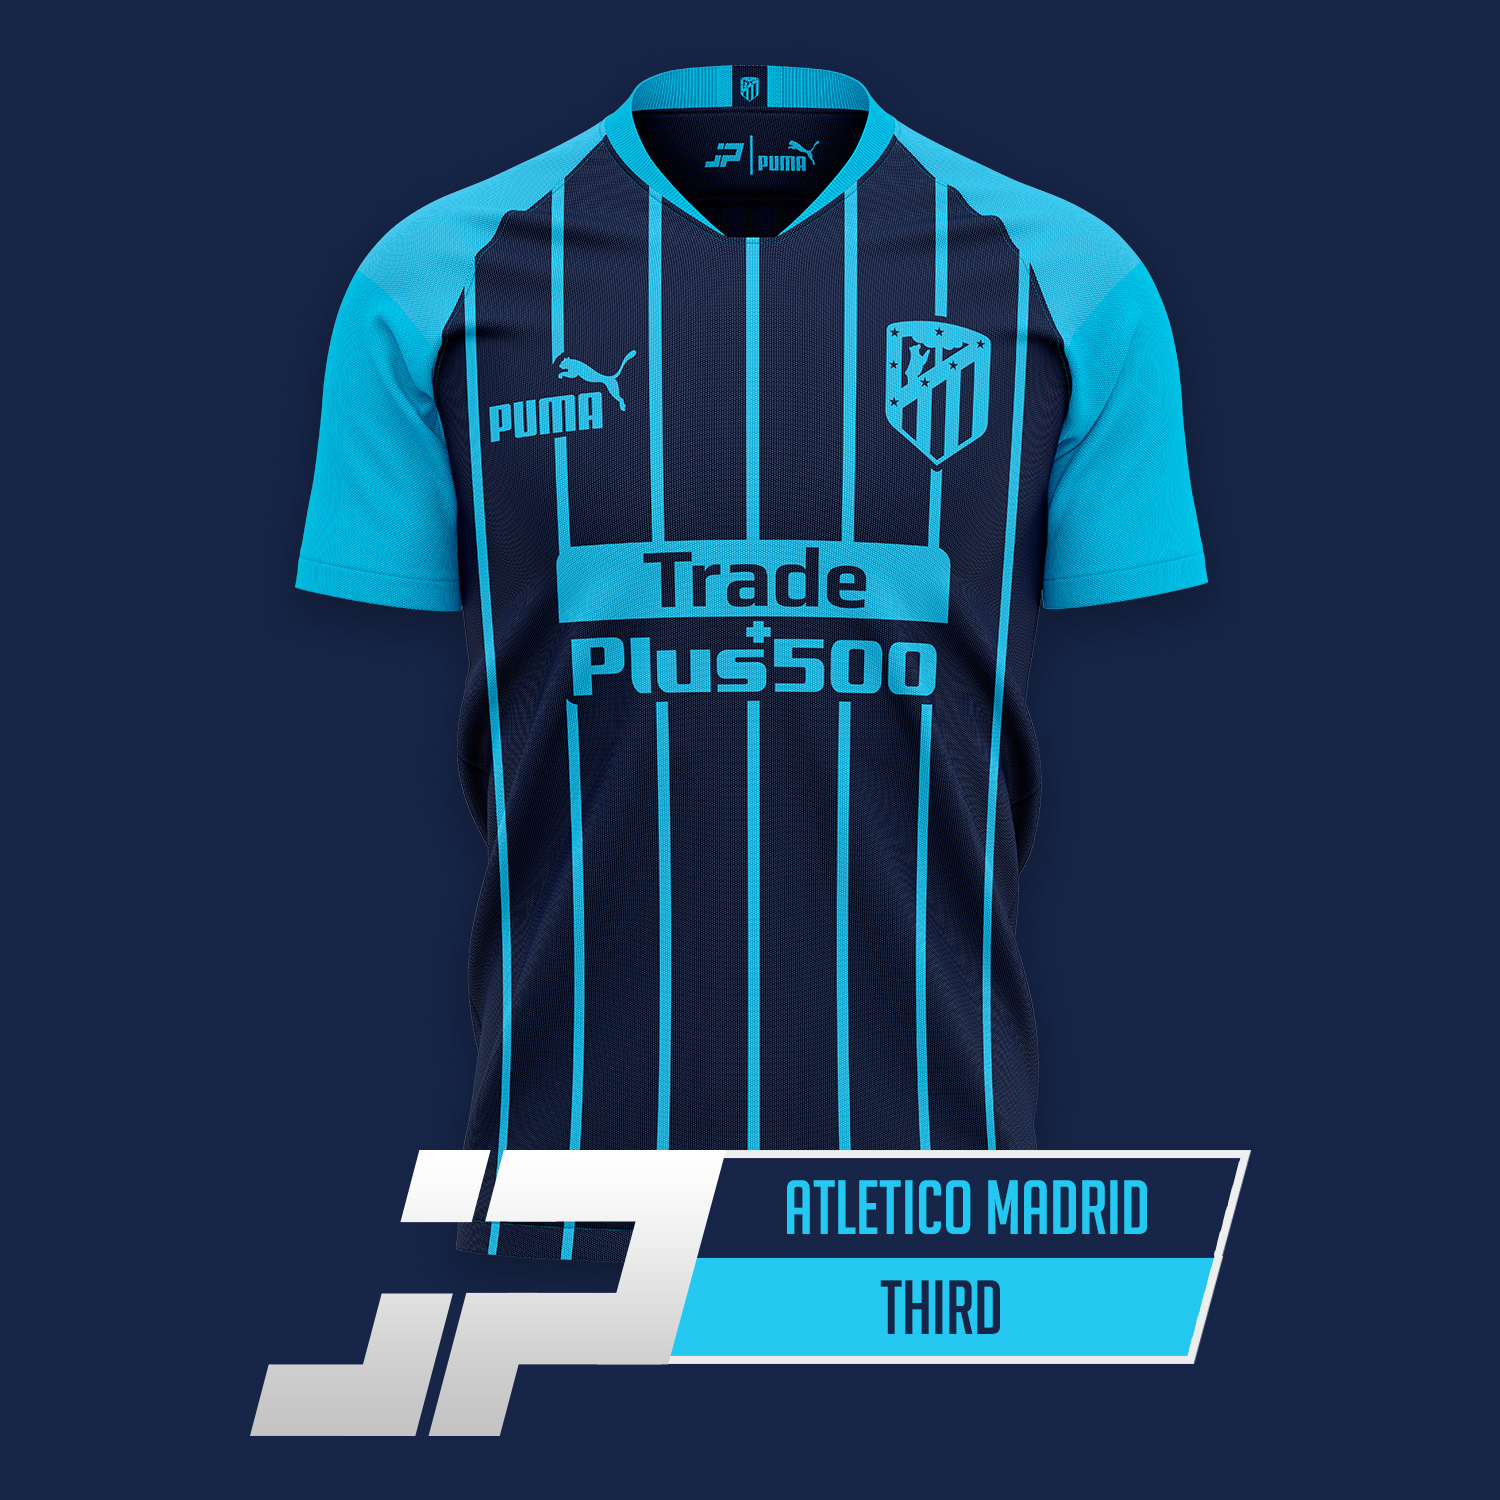 Puma Atletico Madrid 20 21 Home Away Third Kit Concepts By Jpereira Footy Headlines